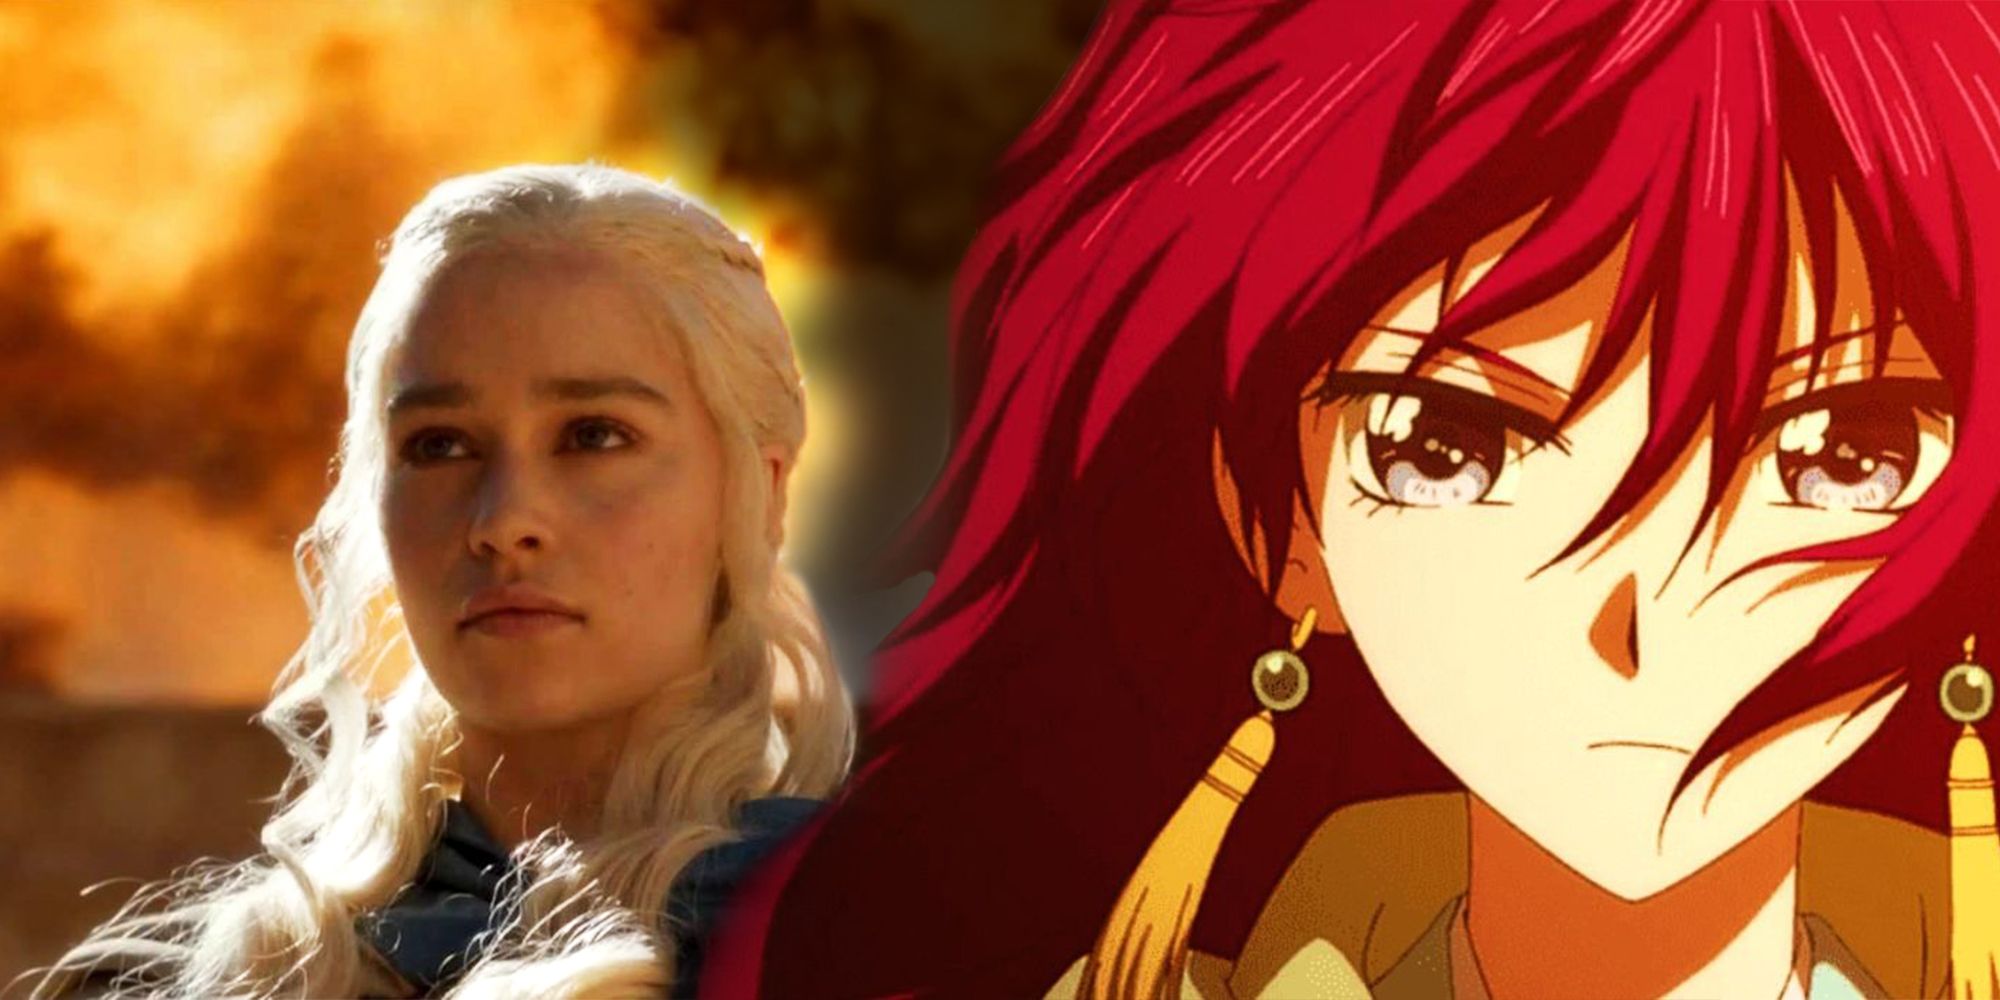 5 Anime for “Game of Thrones” Fan - HubPages